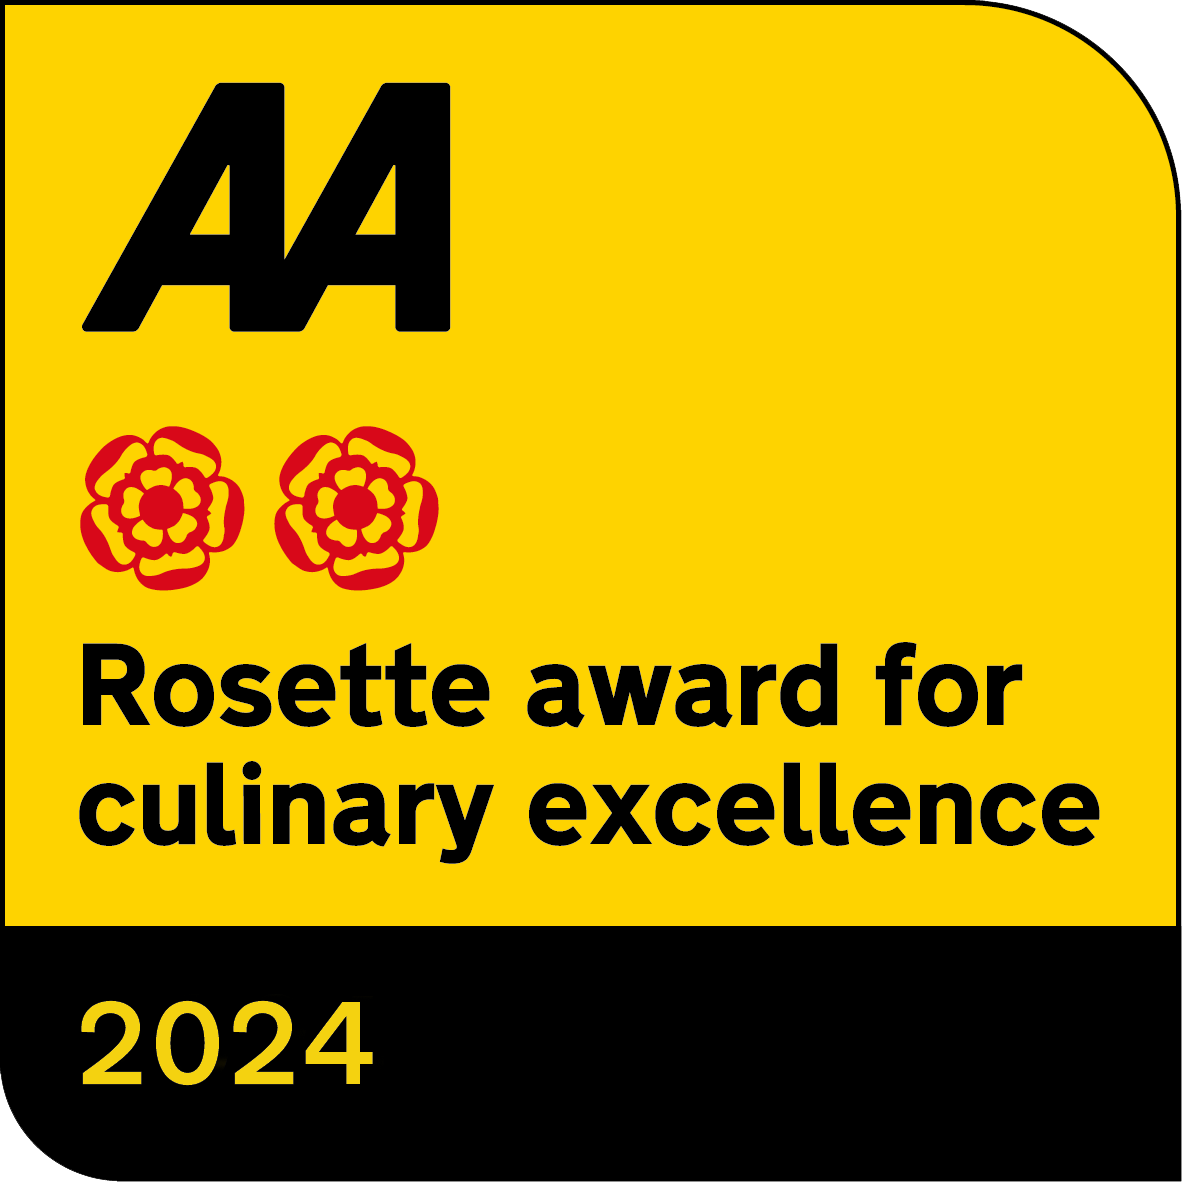 AA 2 Rosette Award For Culinary Excellence 2024